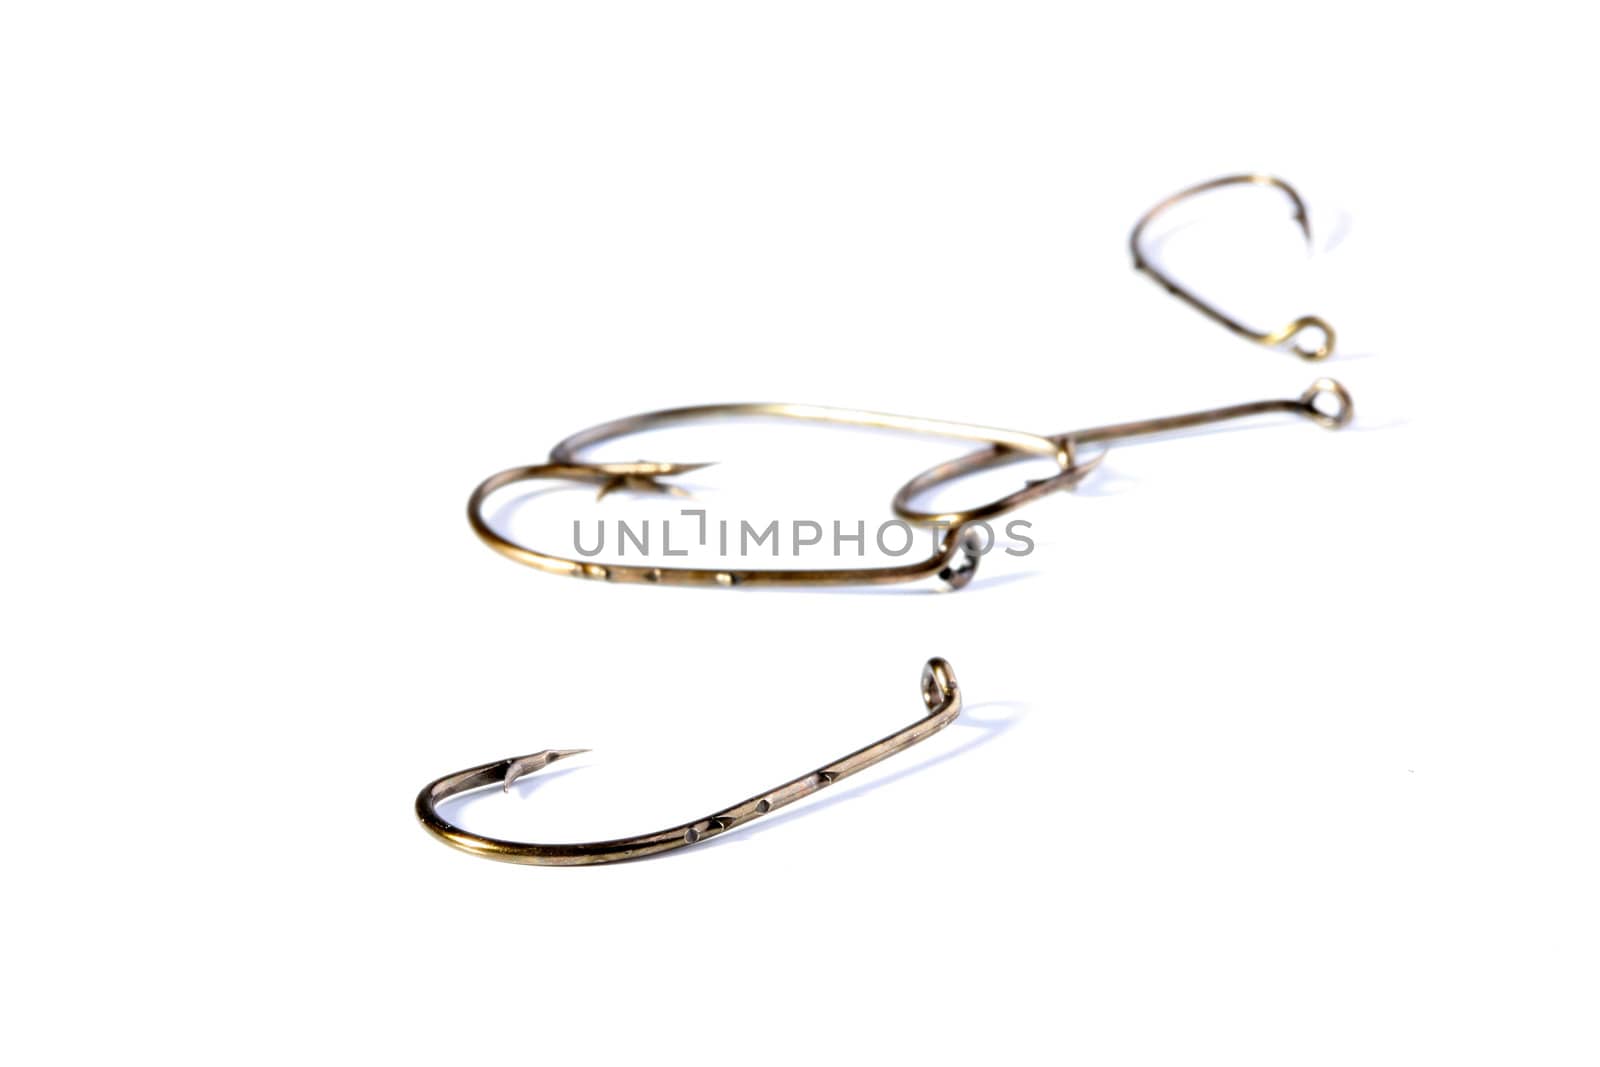 Set of hooks for fishing in the rivers, lakes and the seas.